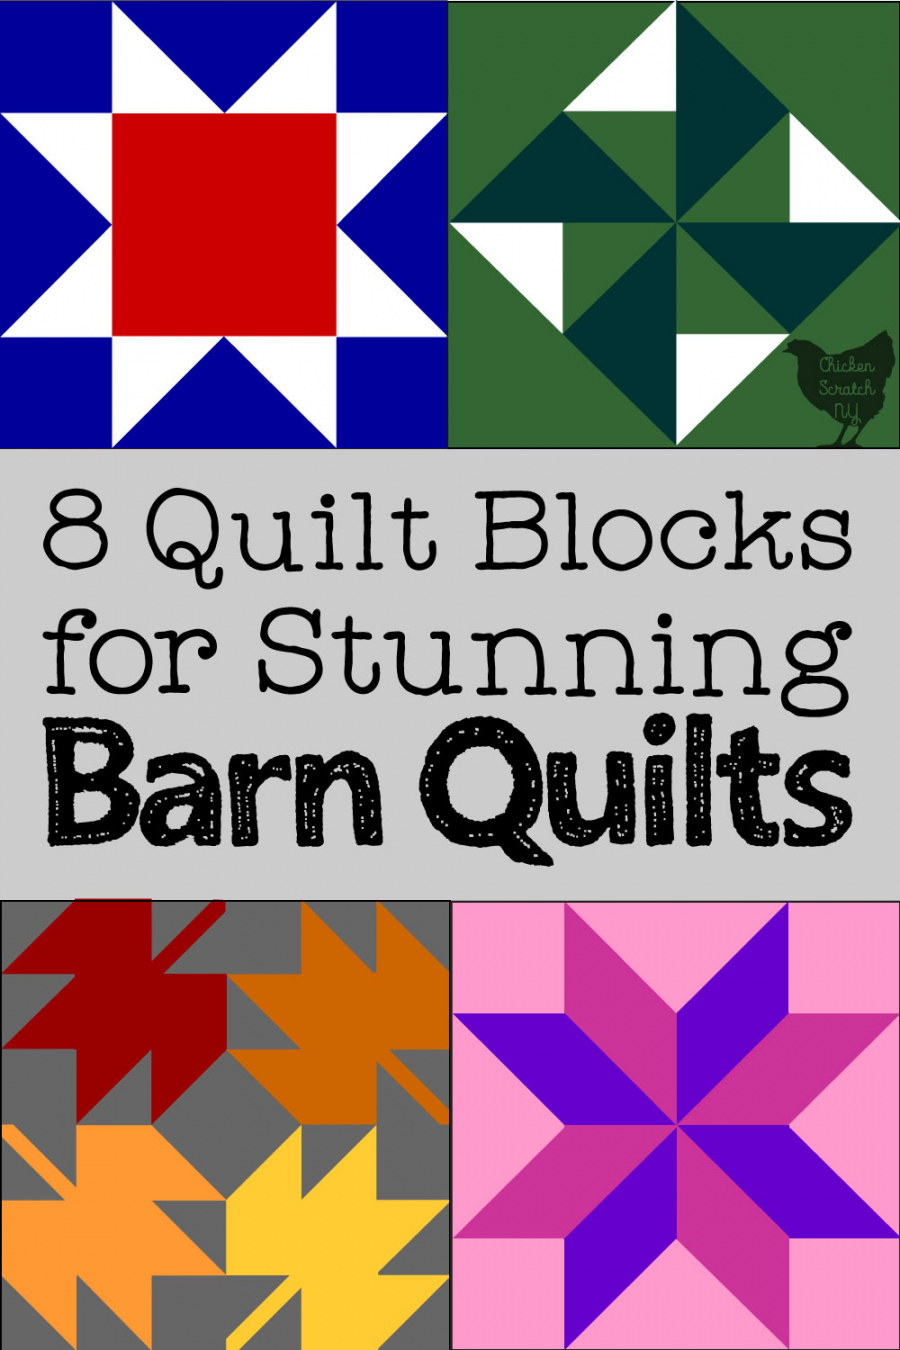 Beautiful Quilt Blocks for Barn Quilts [Free Printable)